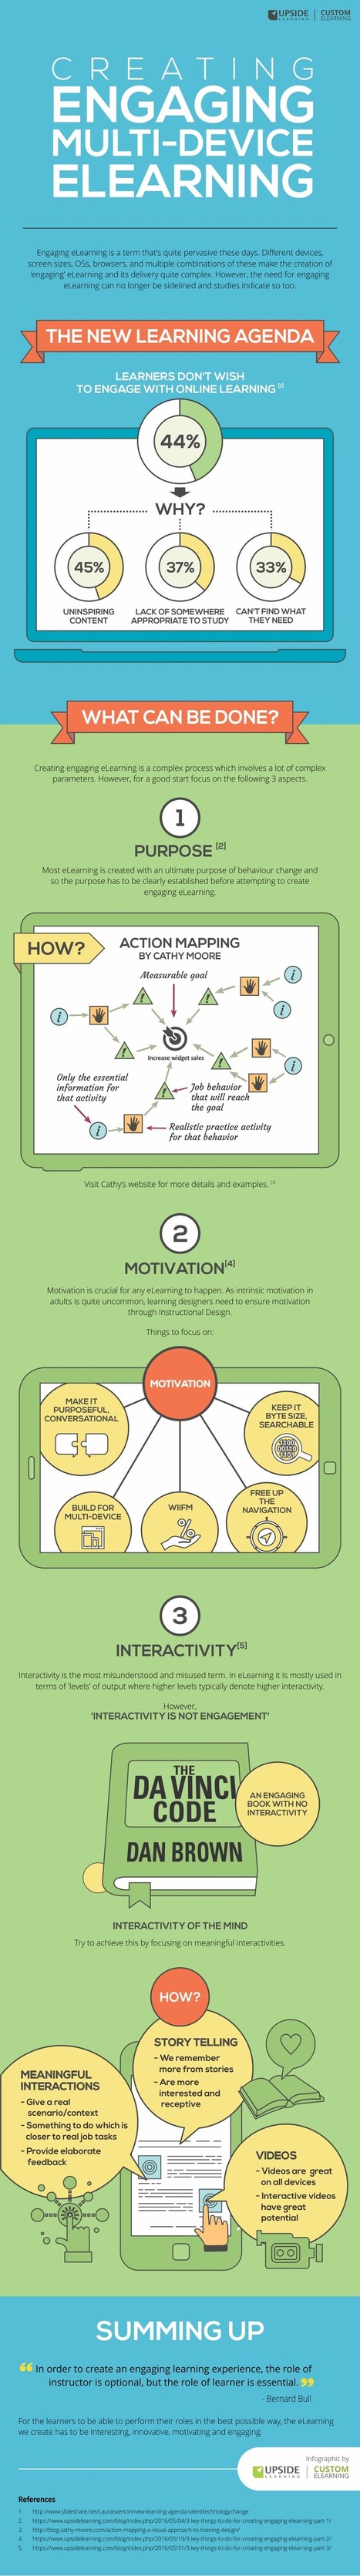 Creating Engaging Multi-device eLearning | Infographic | E-Learning-Inclusivo (Mashup) | Scoop.it